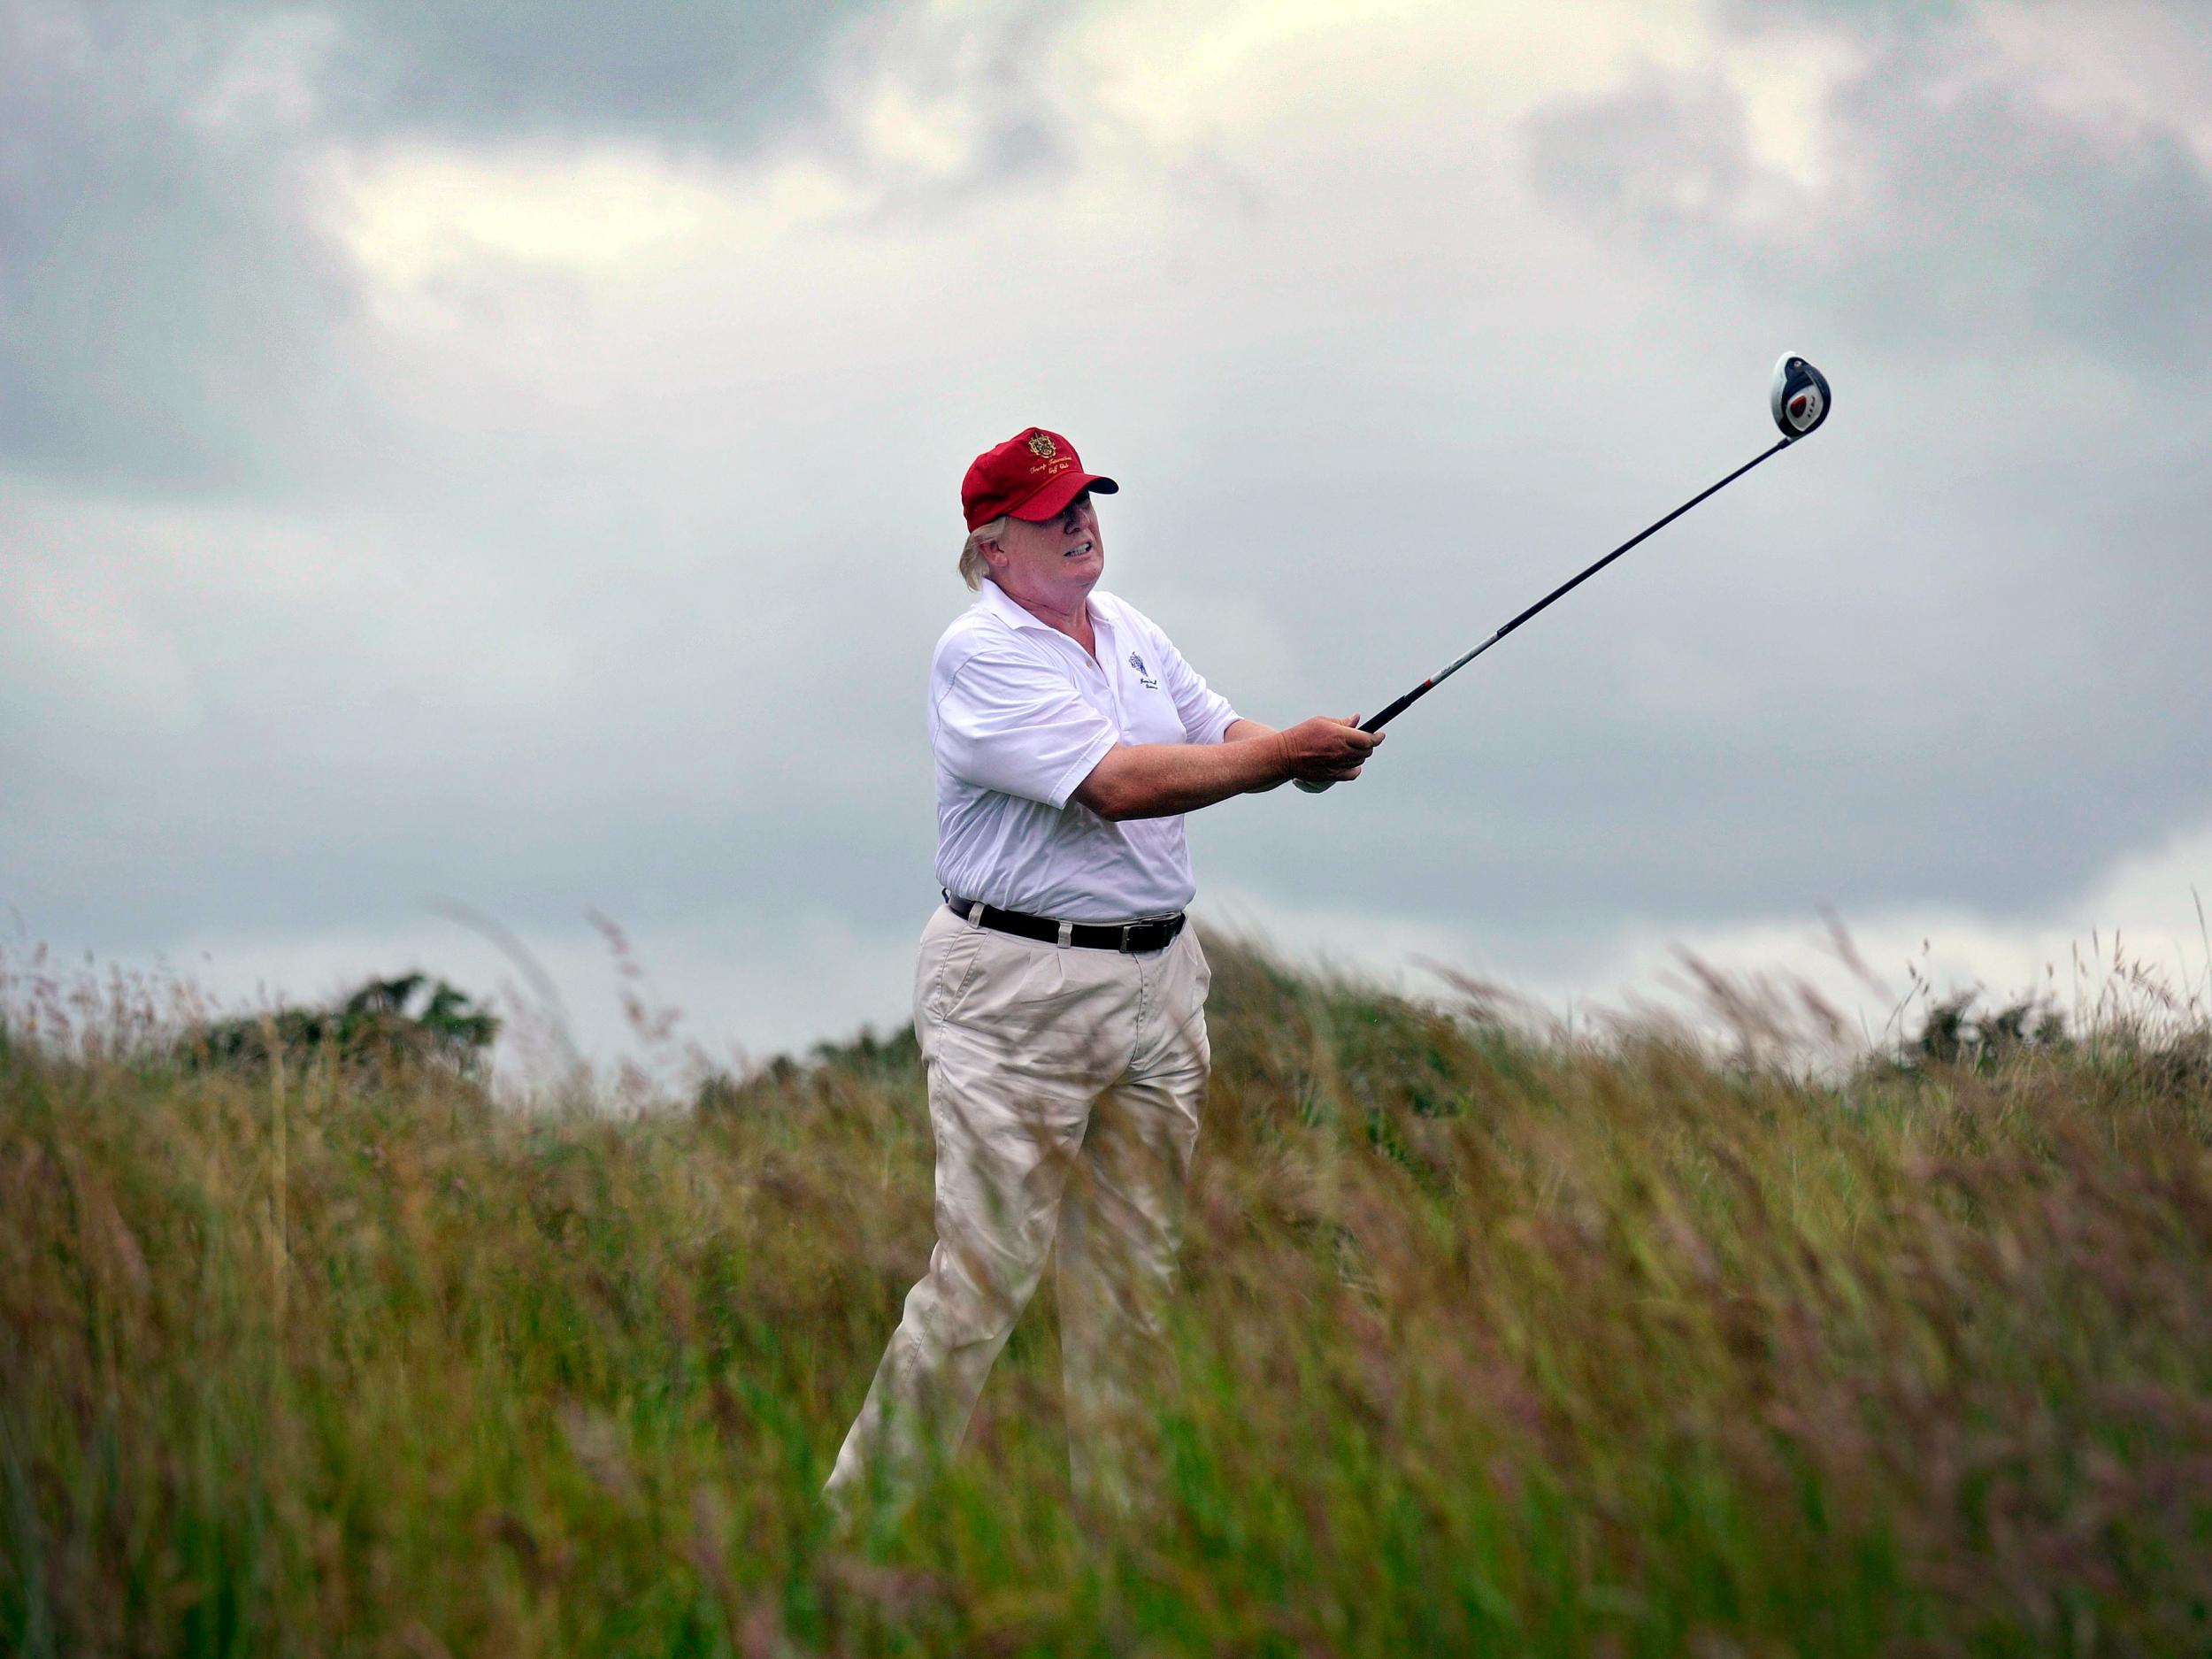 Donald Trump plays a stroke as he officially opens his new multi-million pound Trump International Golf Links course in Aberdeenshire, Scotland, on 10 July 2012